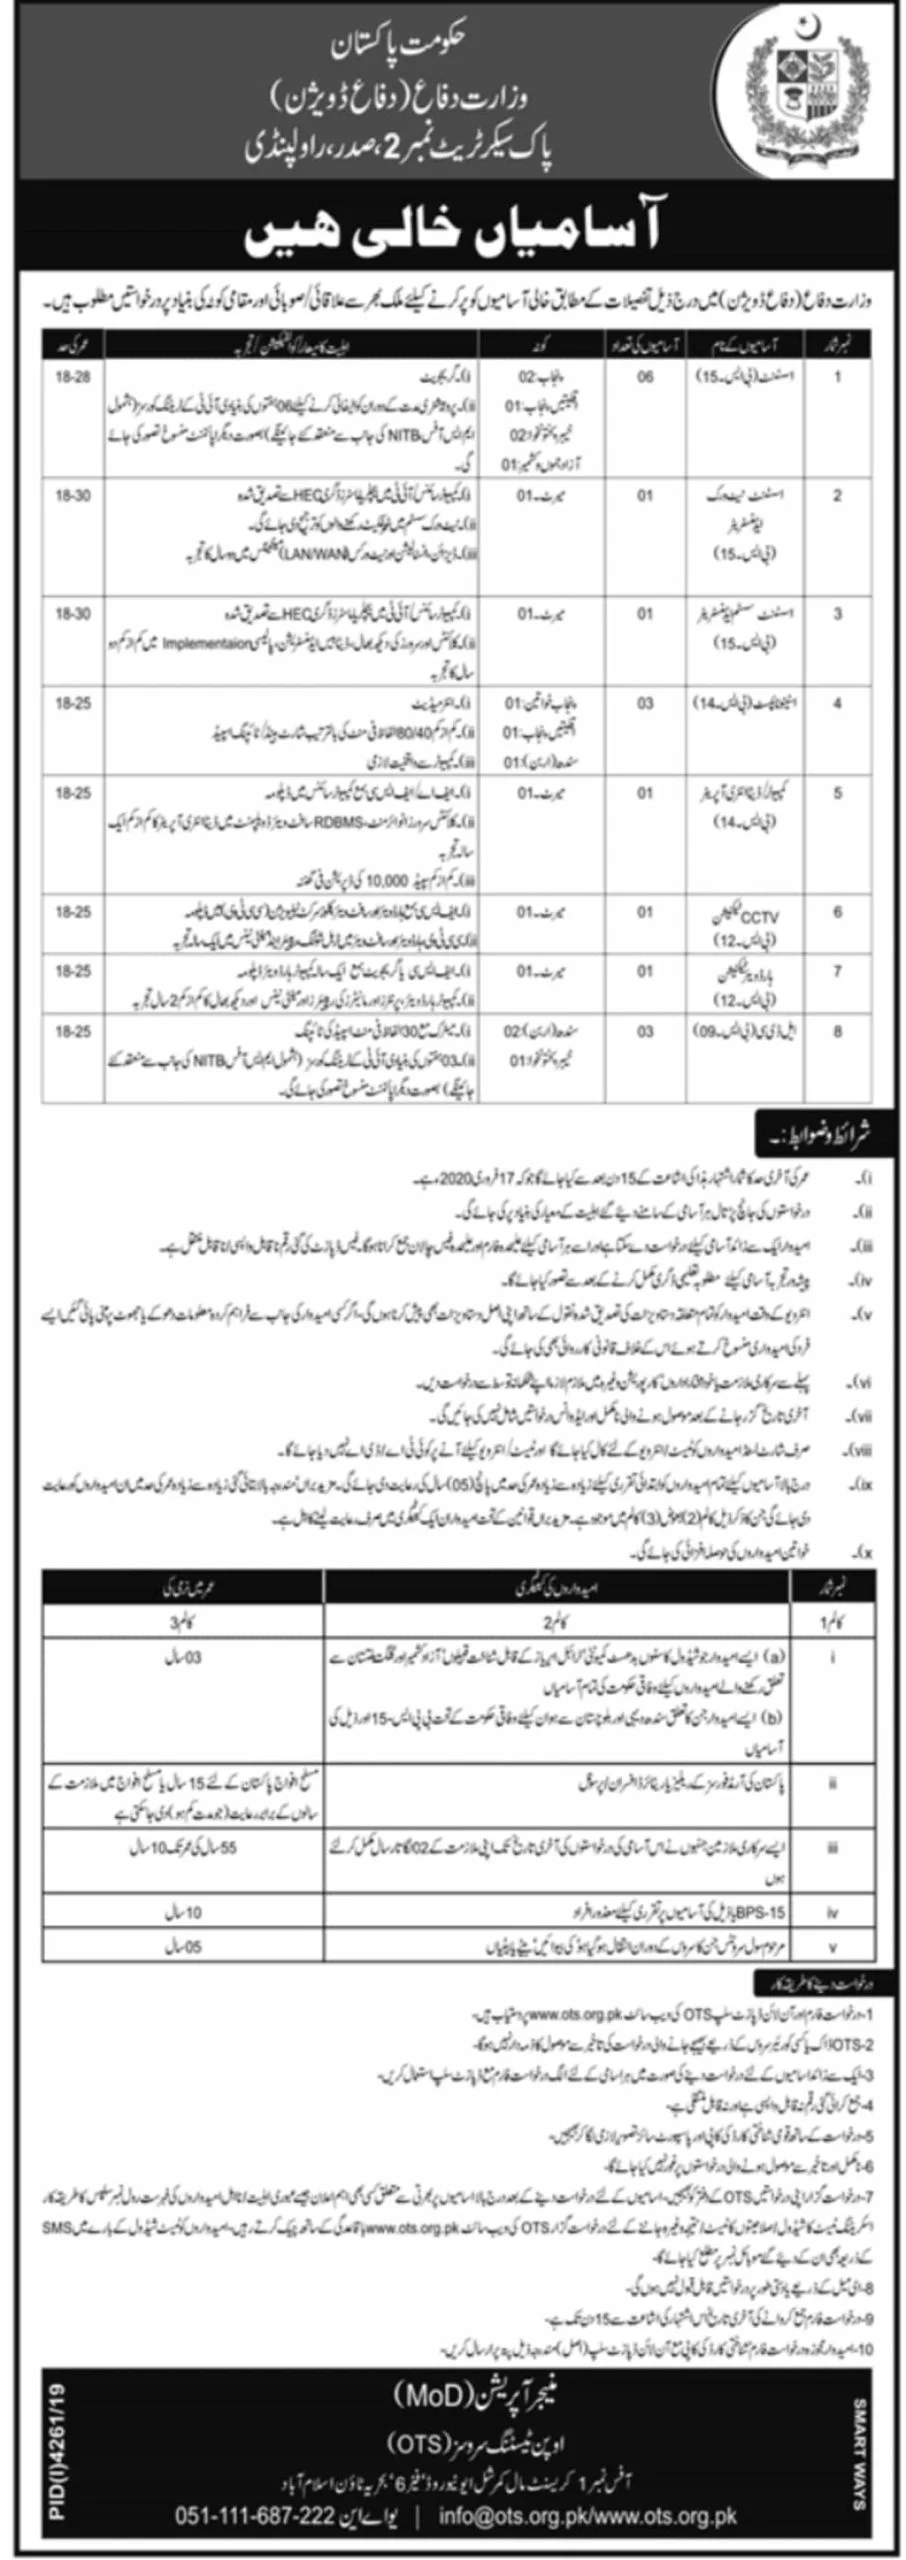 Ministry of Defence MOD Jobs February 2020 OTS Apply Online Latest